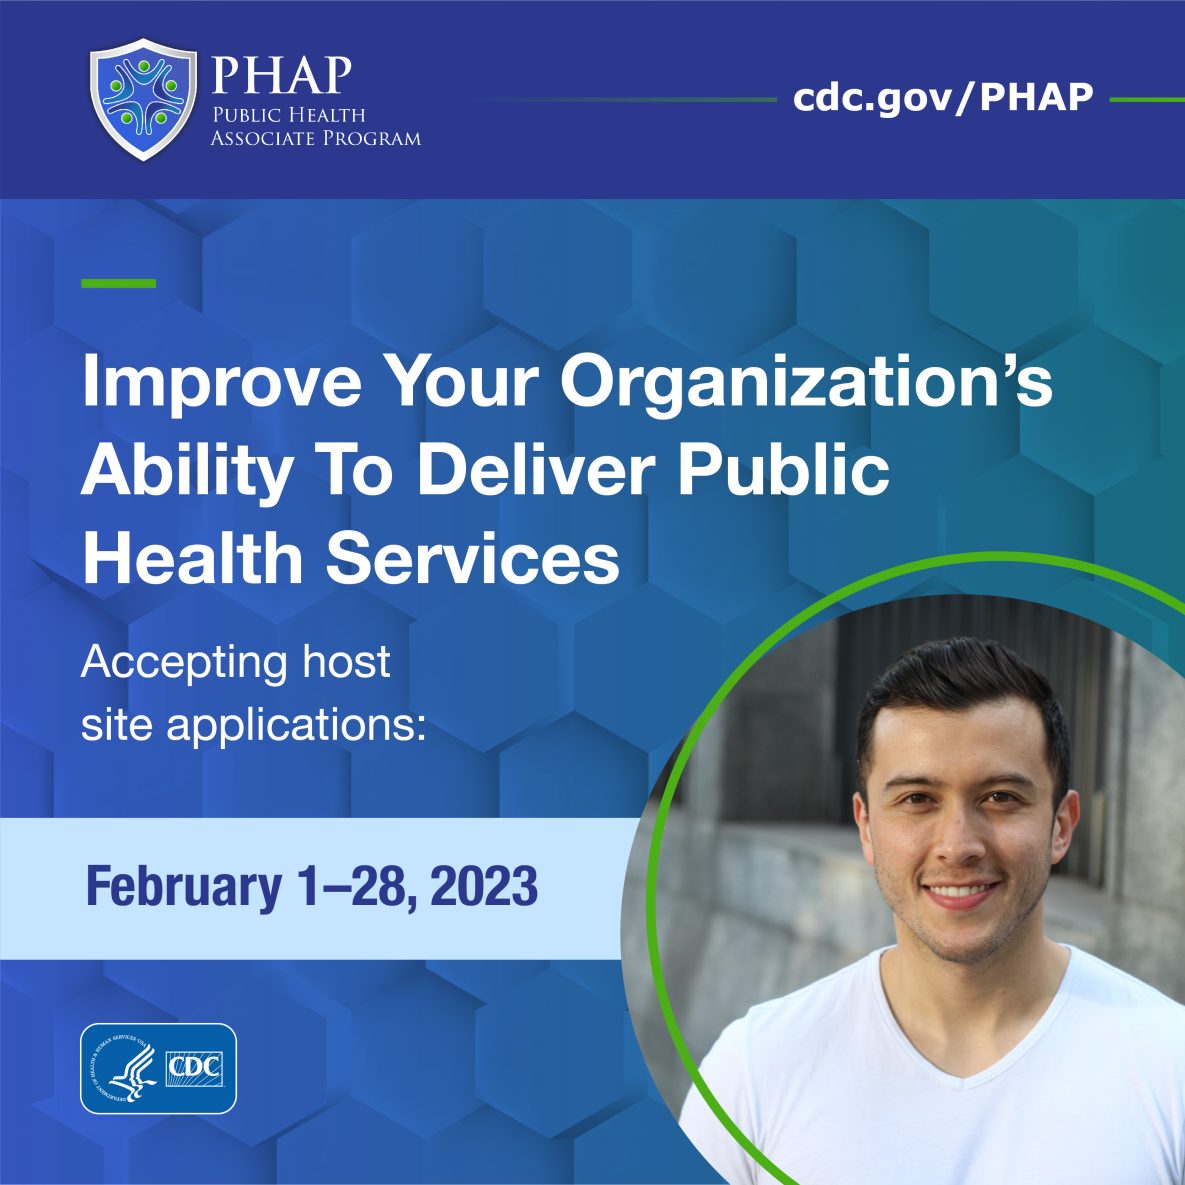 Info graphic with the text, “Improve Your Organization’s Ability to Deliver Public Health Services. Accepting host site applications from February 1-28, 2023.”